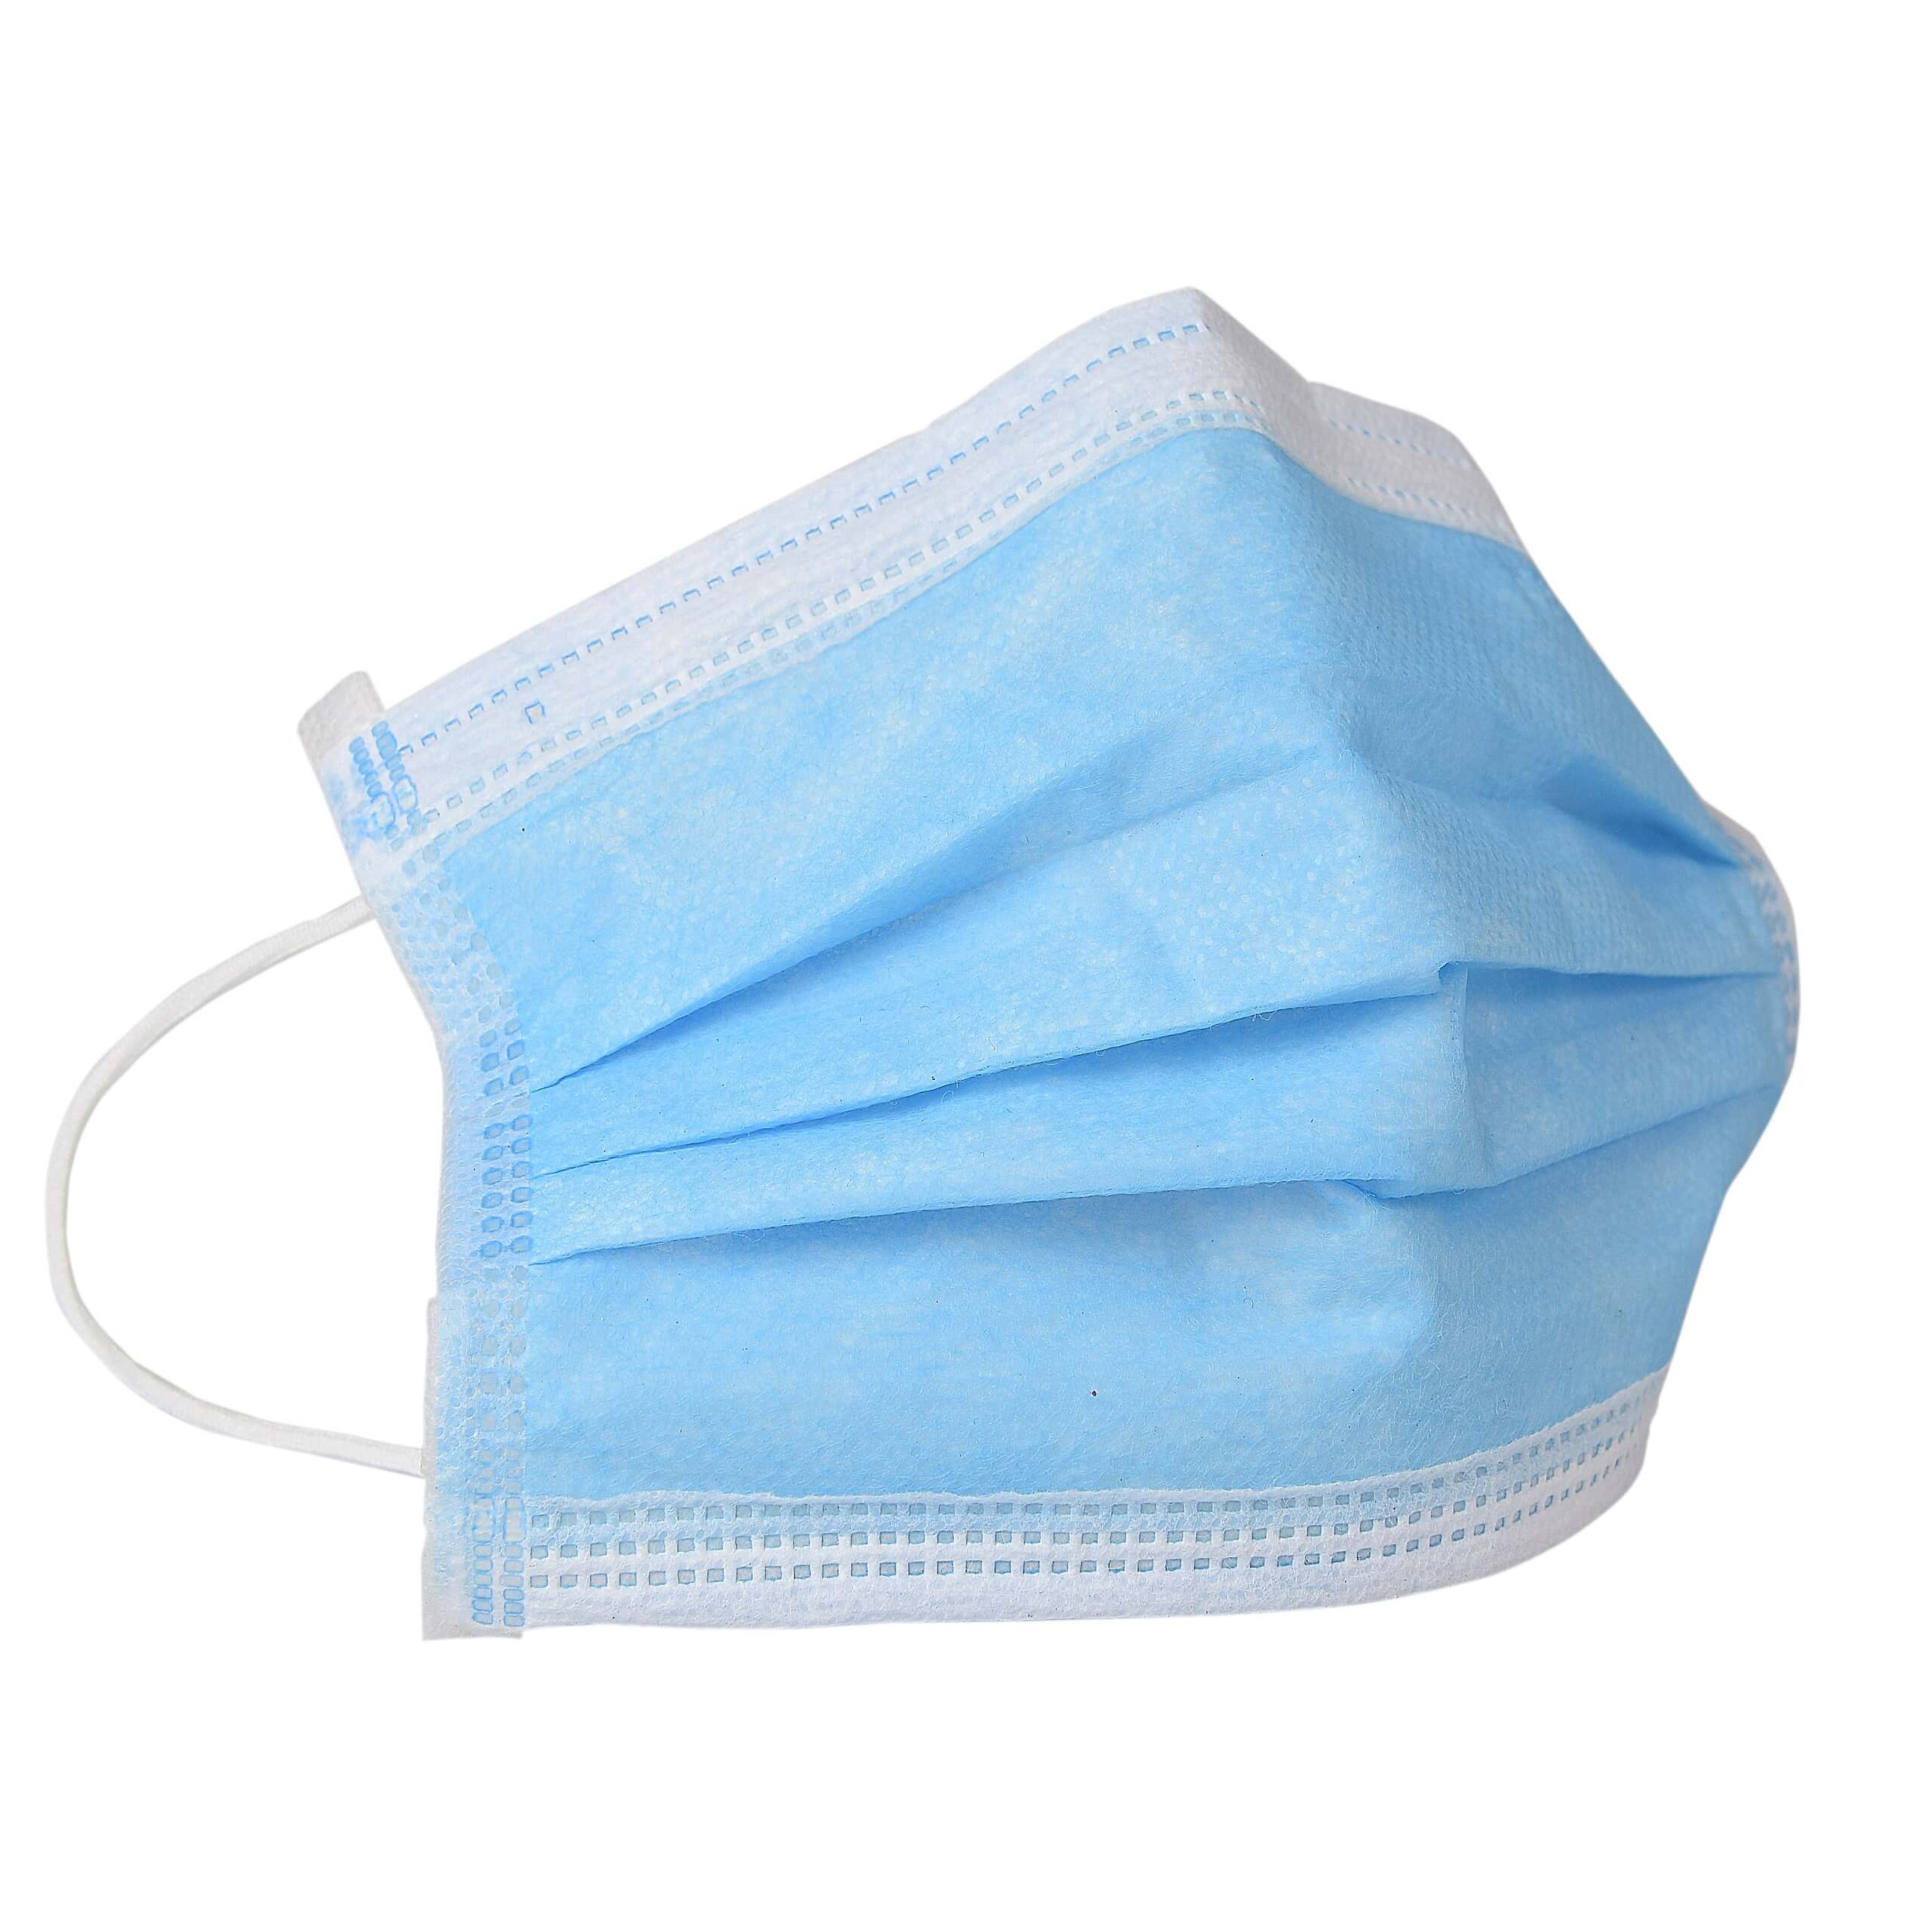 An image of one of our Blue Disposable Face Masks.